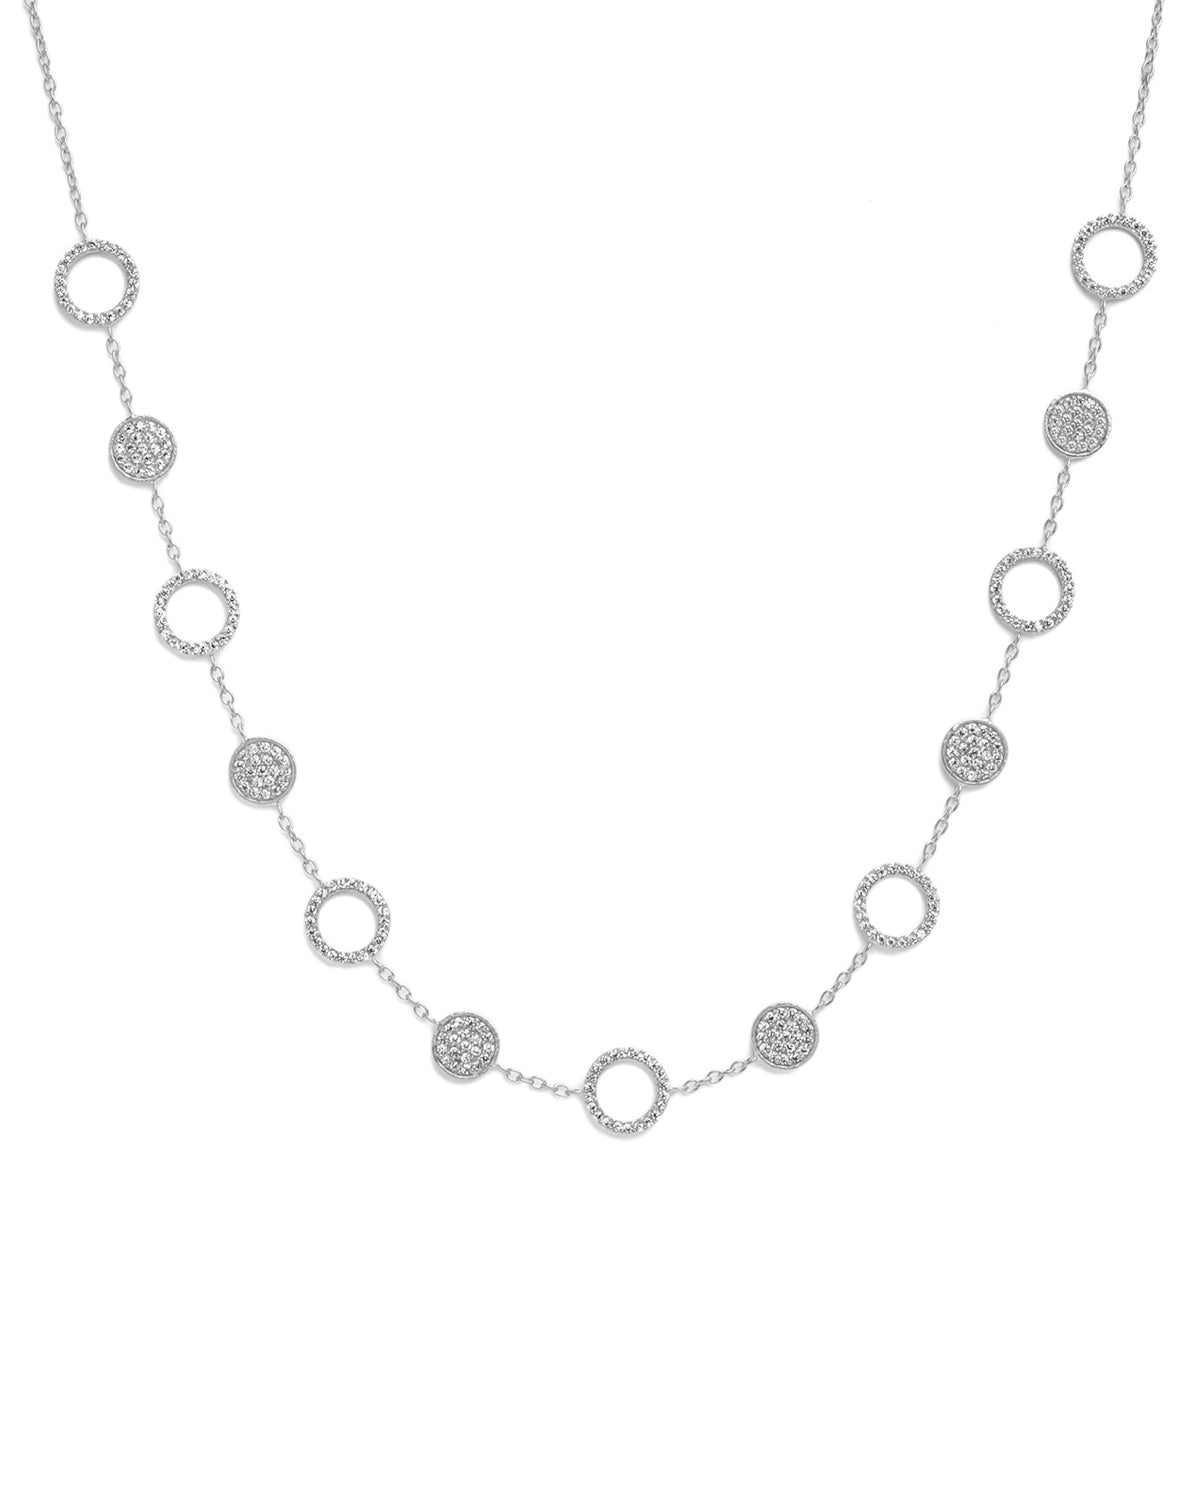 Glimmering Crystal Silver Necklace - Moon London